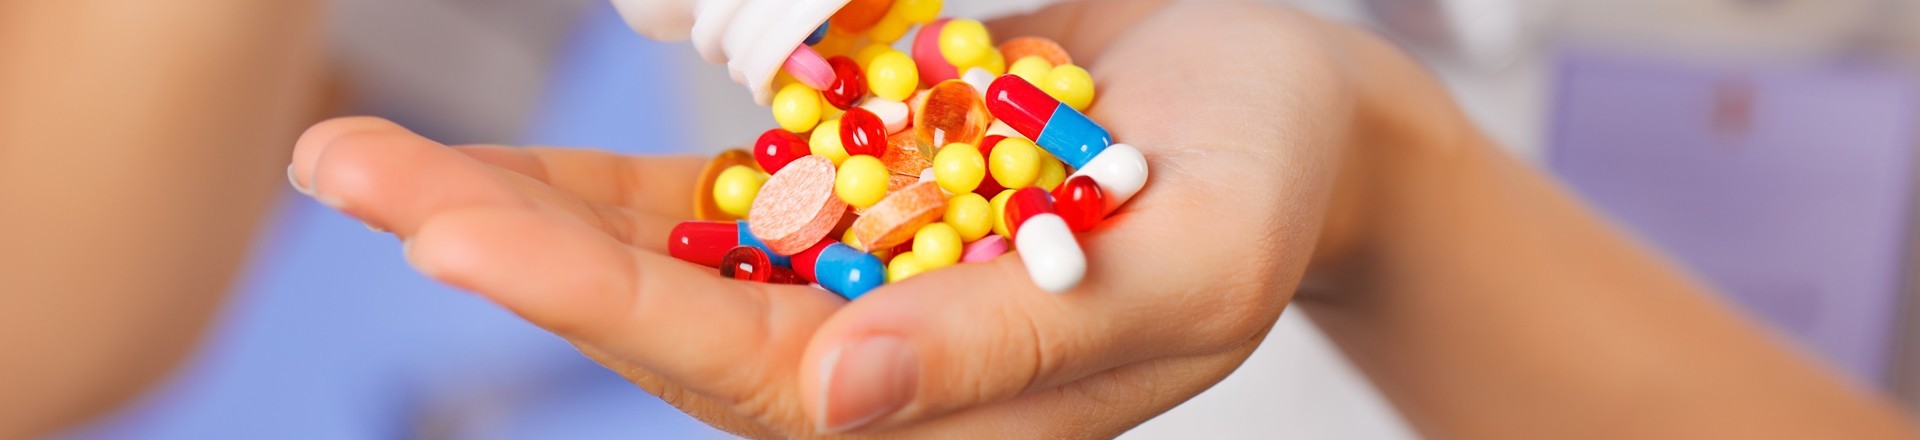 handfull of bright colored pills indicating too many medications and polypharmacy